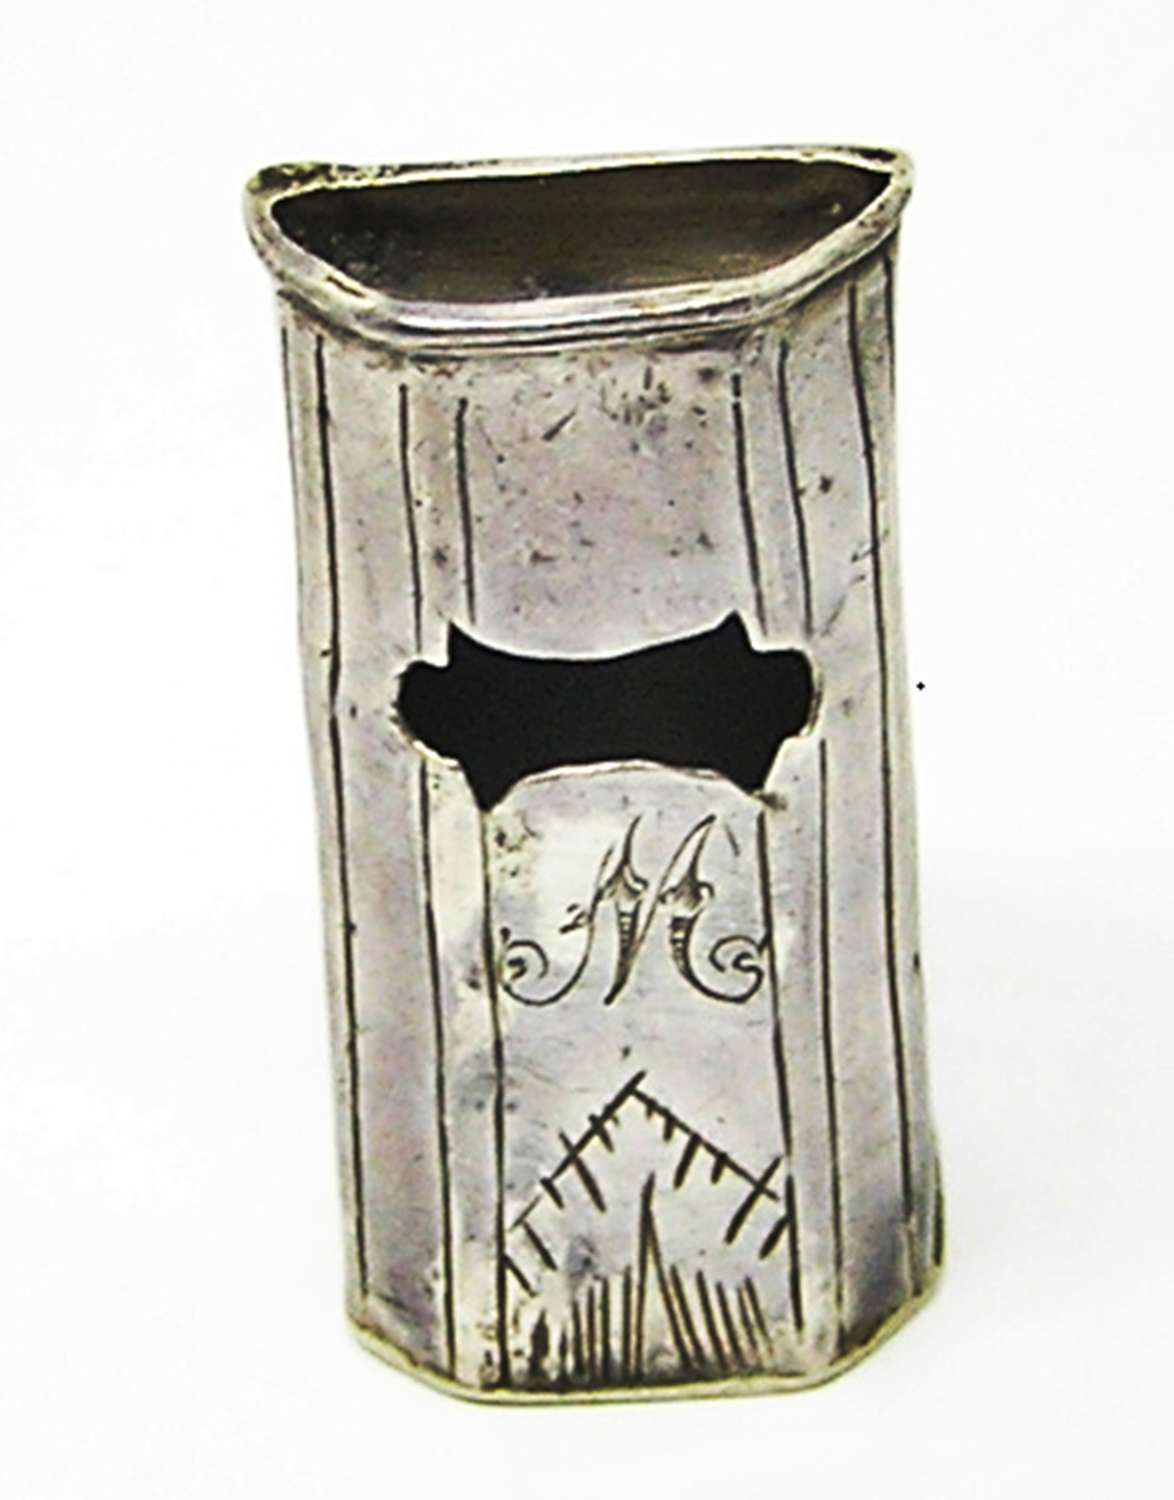 Stuart period silver hawking or officers whistle with makers mark